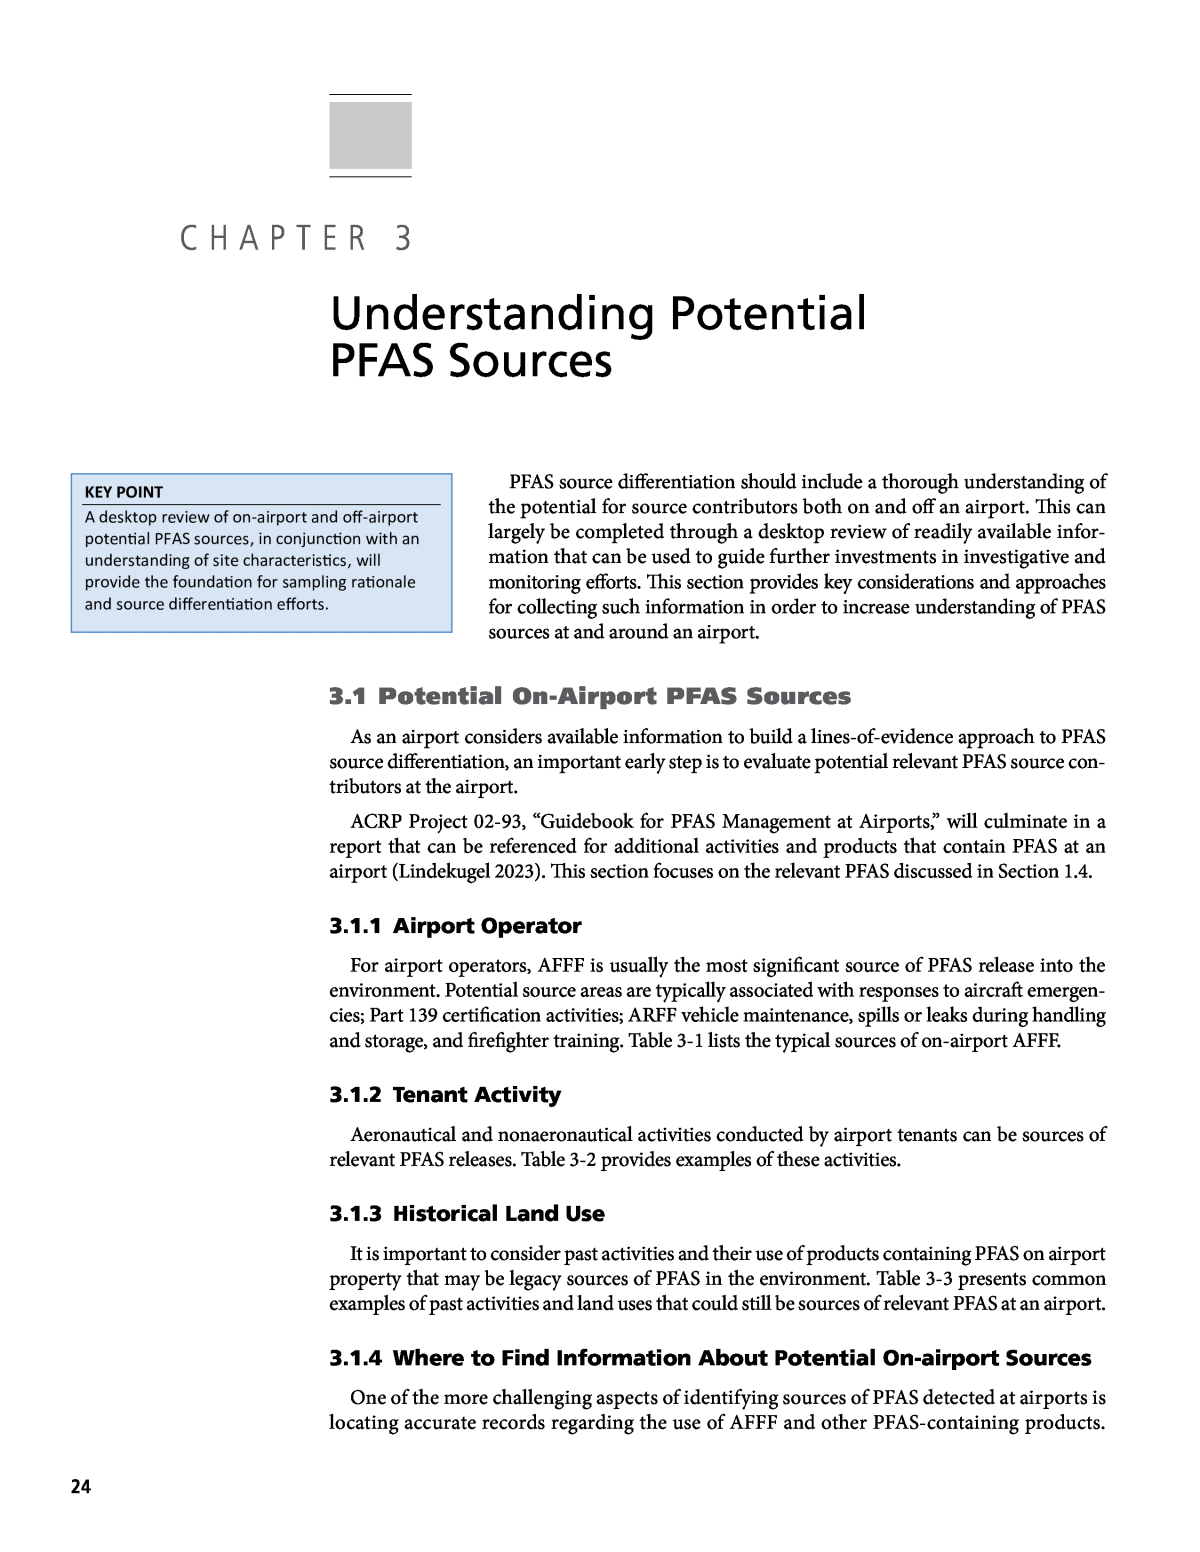 Chapter 3 - Understanding Potential PFAS Sources, PFAS Source  Differentiation Guide for Airports